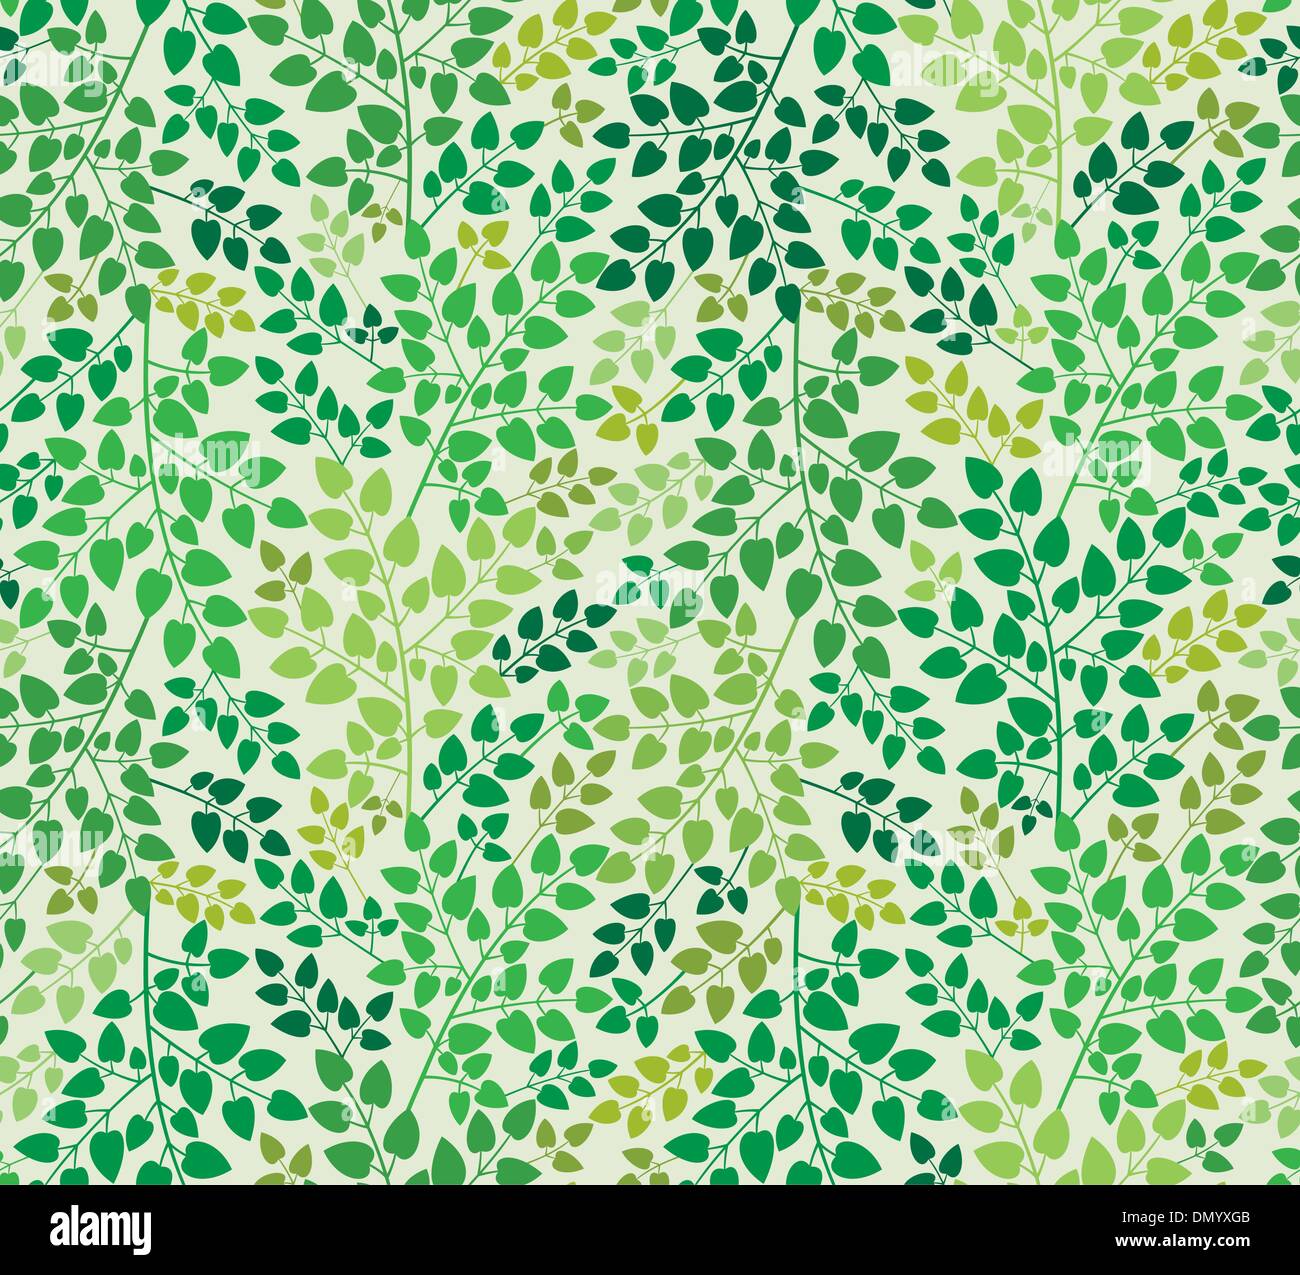 Floral seamless background Stock Vector